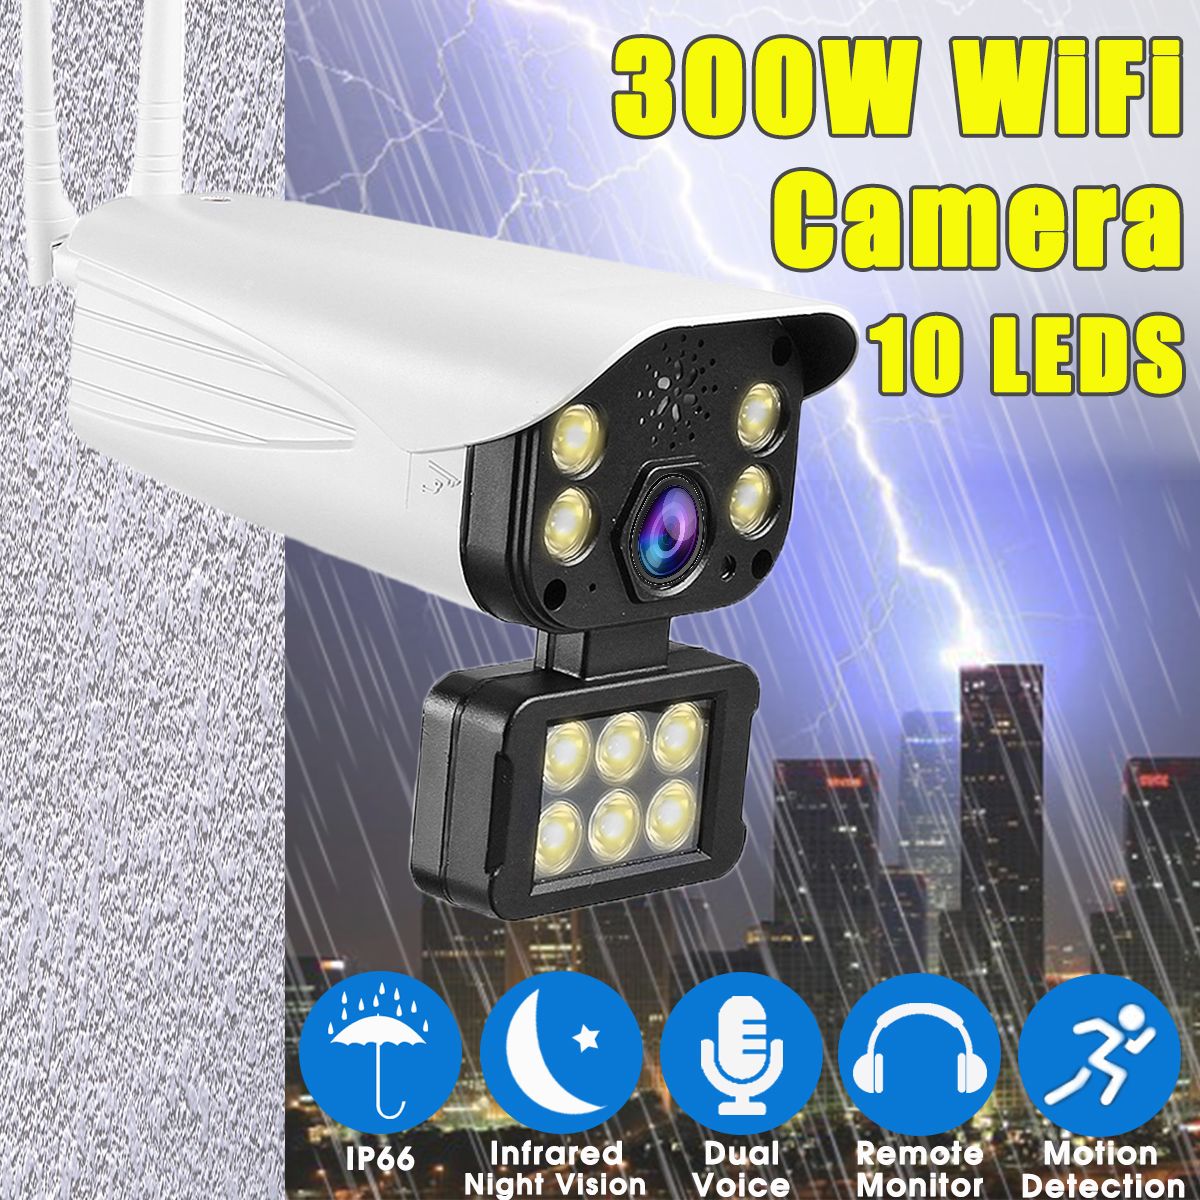 10-LEDS-300W-WiFi-Wireless-Security-IP-Camera-Monitor-Full-Color-Night-Vision-1546282